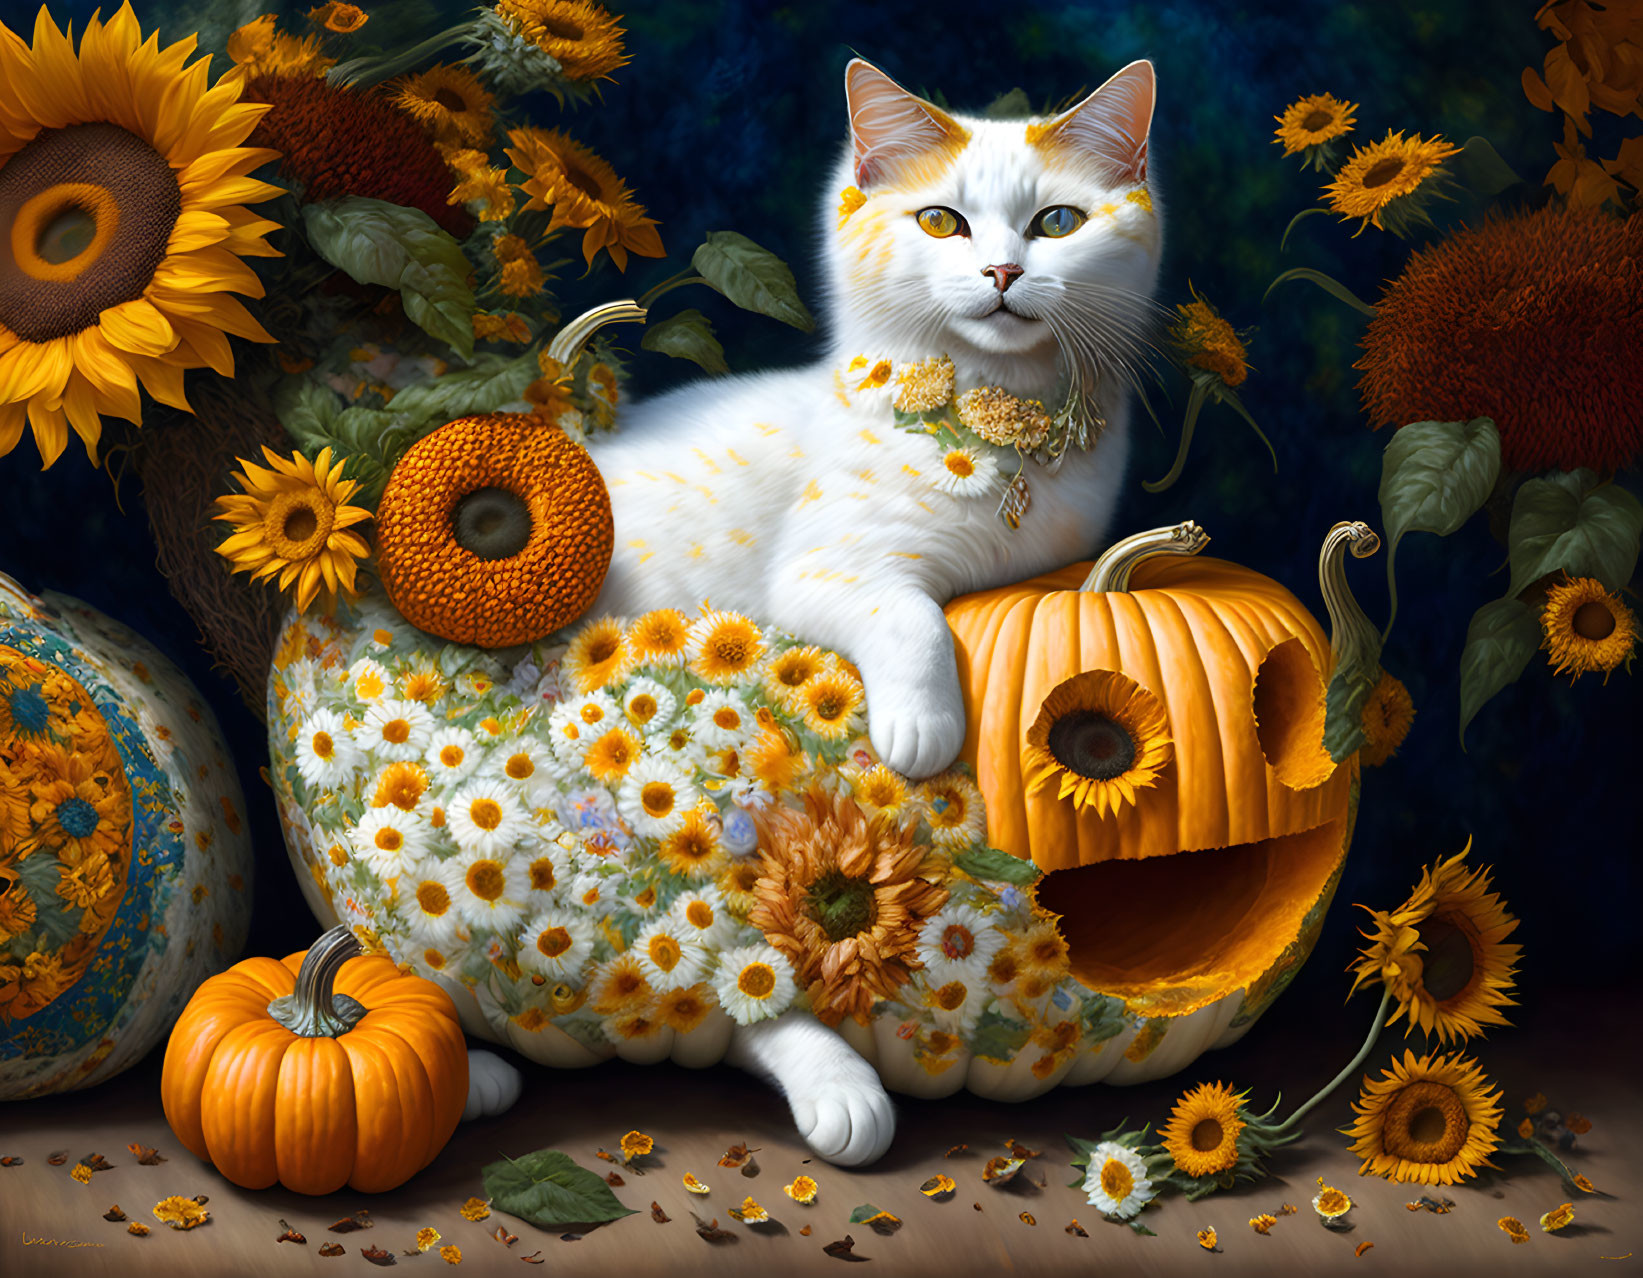 Smiling white cat riding a pumpkin with sunflowers